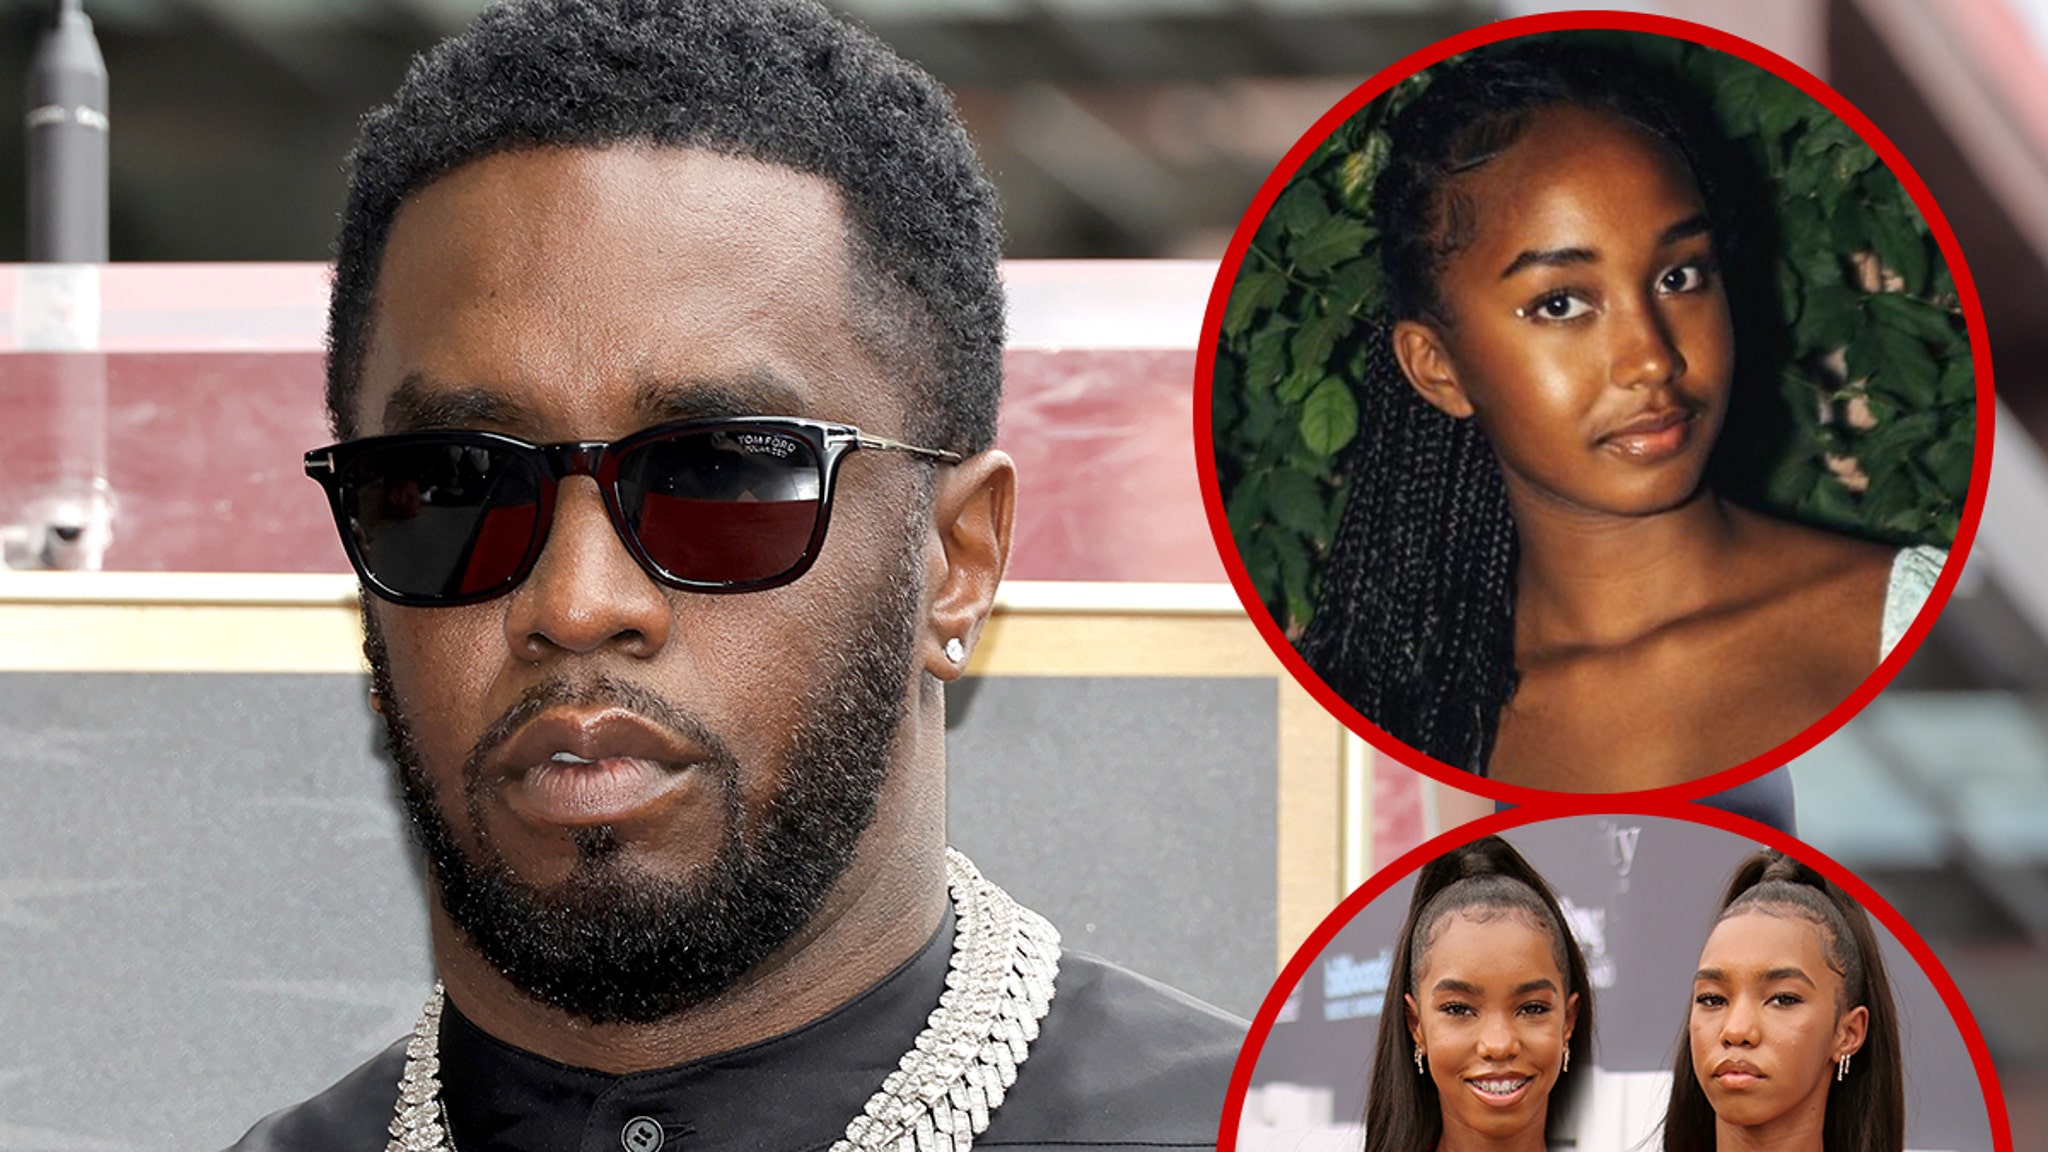 Diddy Missing Daughter's Graduation Amid Grand Jury News, Also Missed Prom